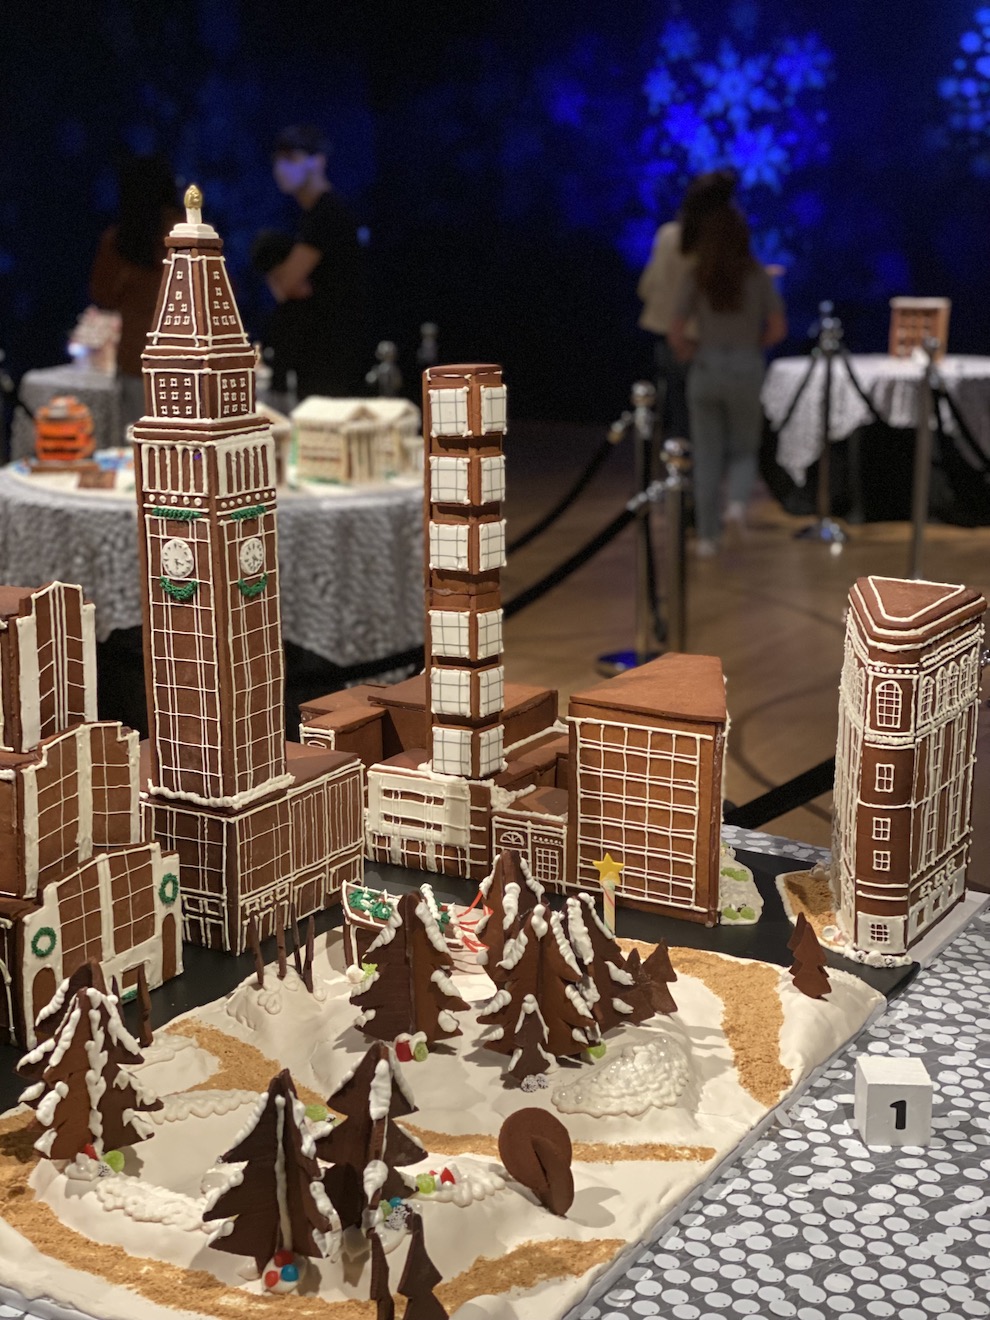 View of the finished display of Madison Square Park, one of the entries from the installation "Gingerbread NYC: Great Borough Bake-Off," 2022.